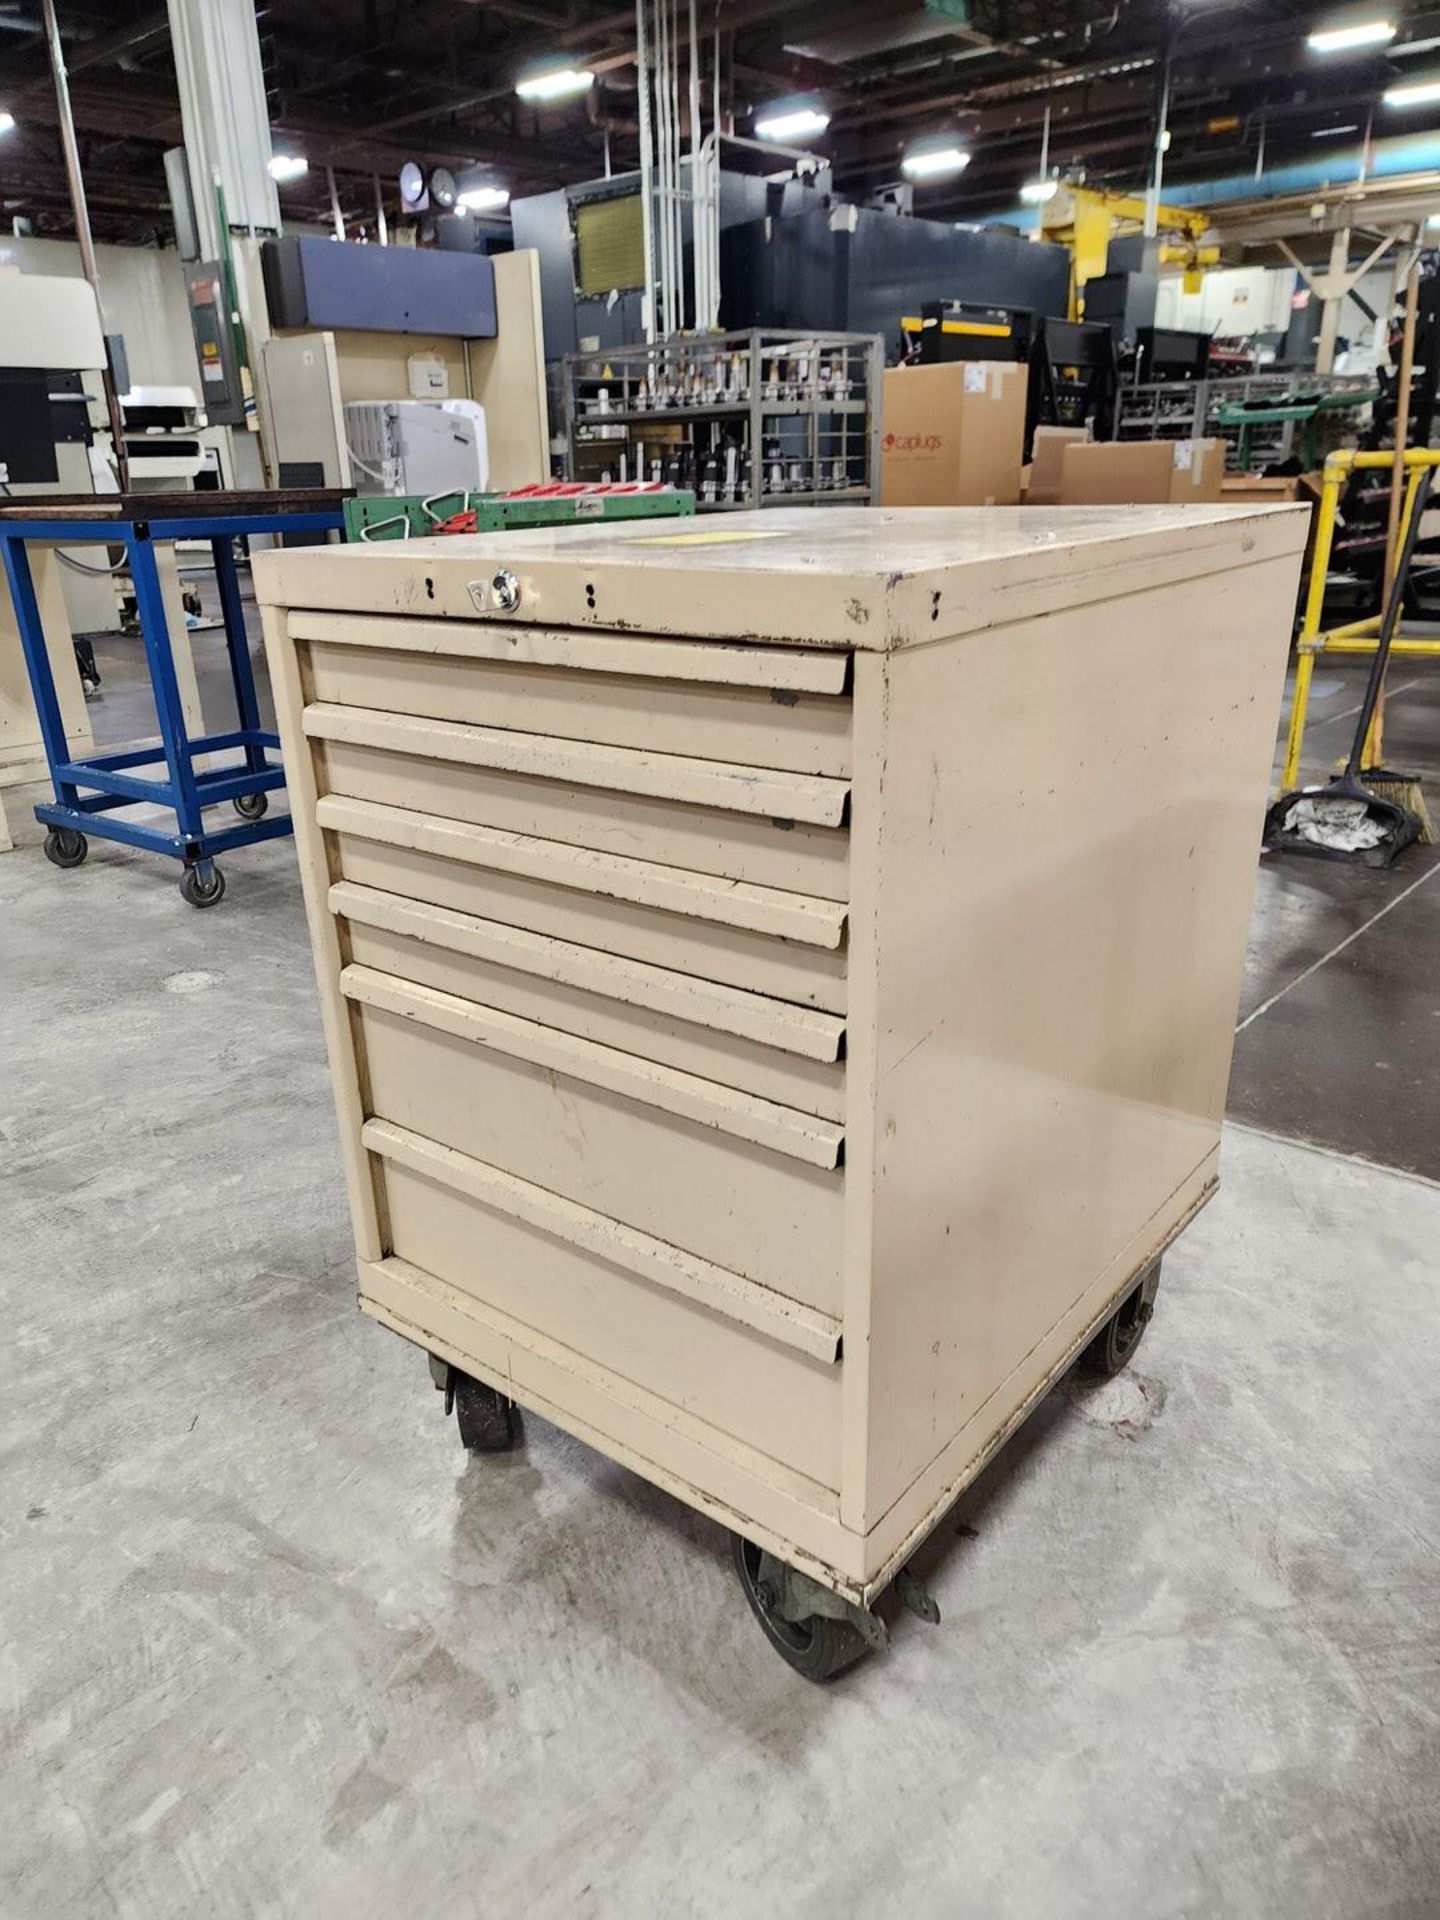 7-Drawer Rolling Modular Cabinet (Location: Machine Room) - Image 2 of 3